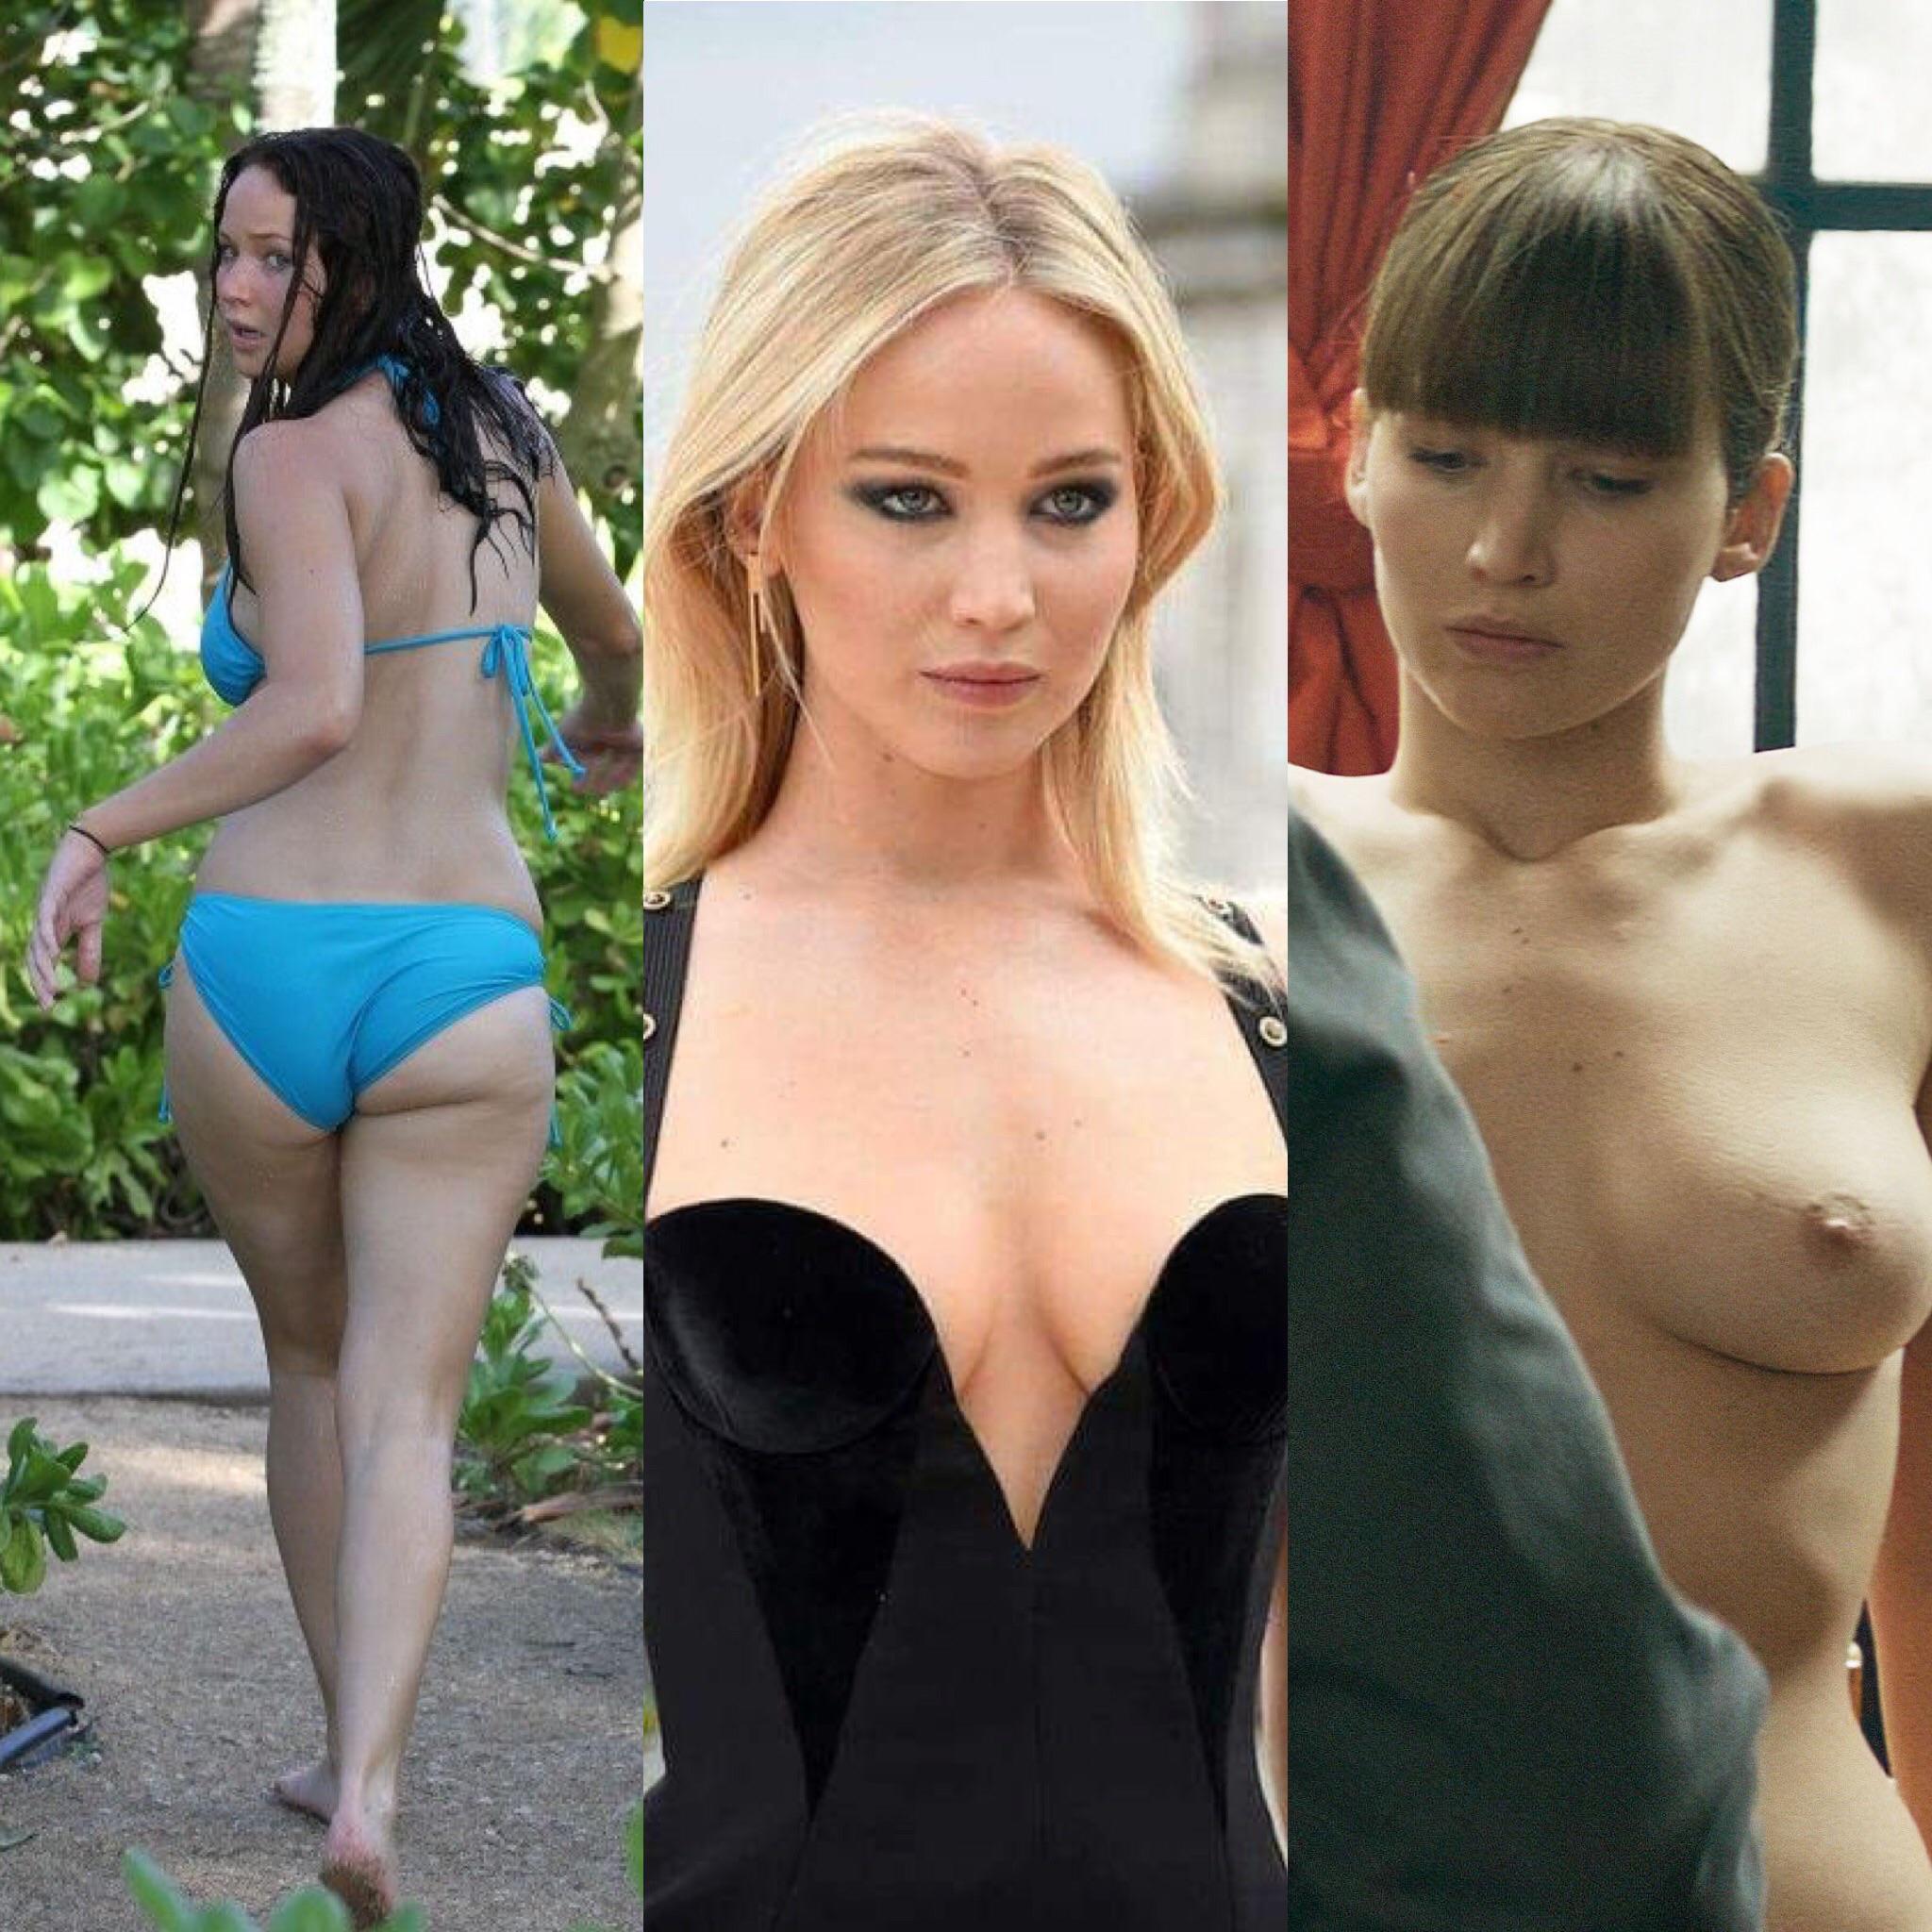 Jennifer Lawrence is yours for a whole weekend. What would you do with her?